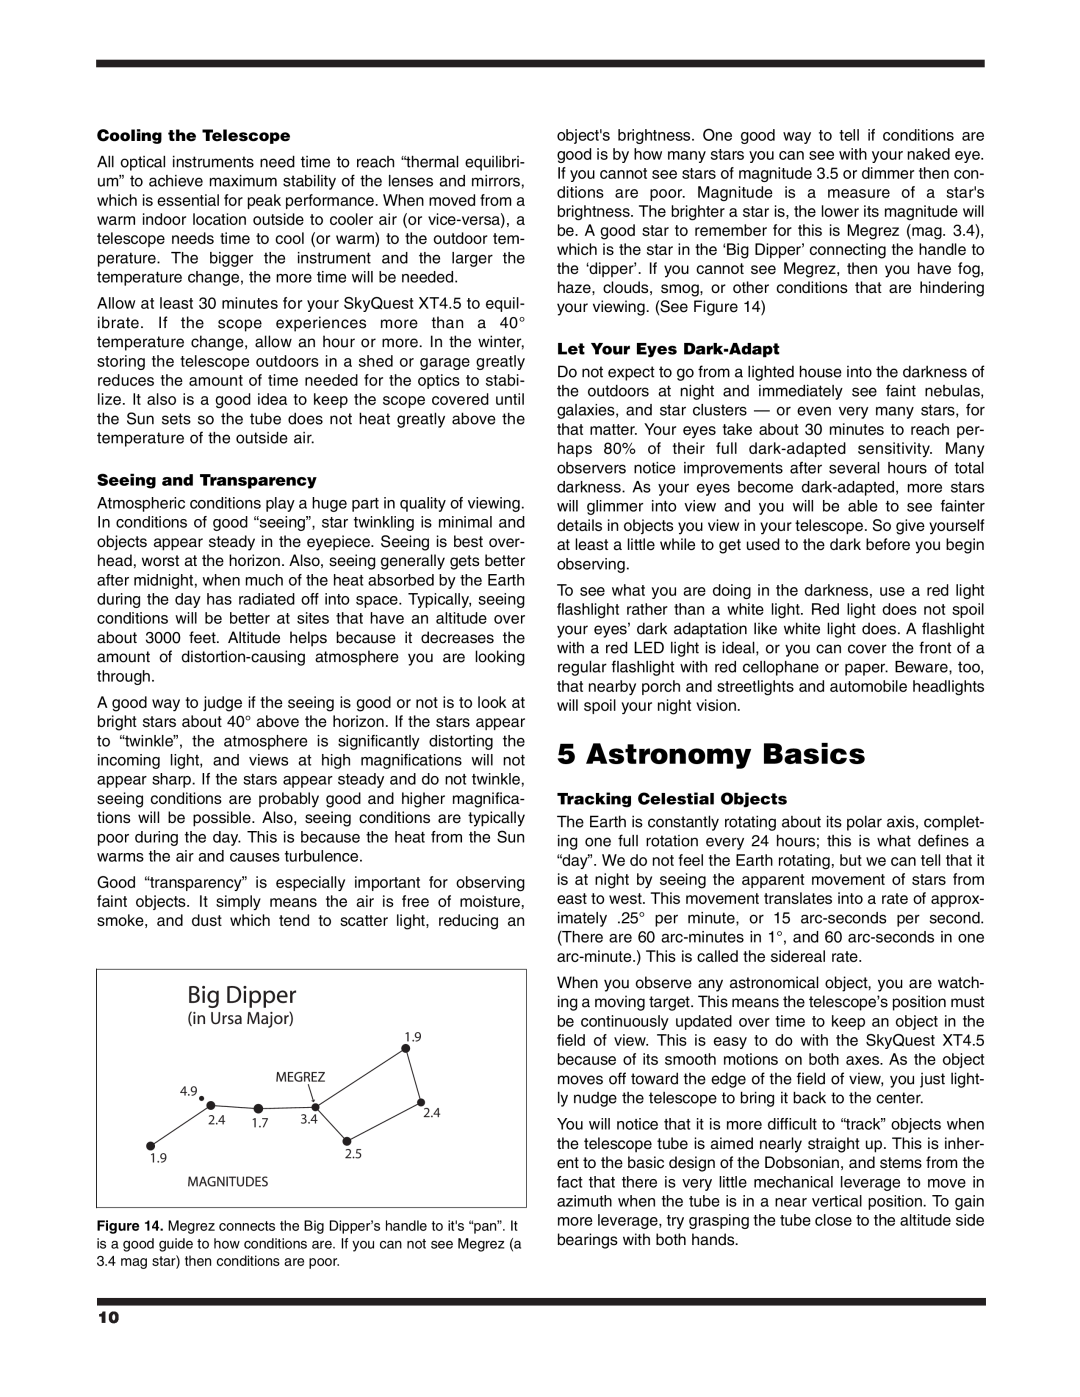 Orion XT4.5 instruction manual Astronomy Basics, Cooling the Telescope, Seeing and Transparency, Let Your Eyes Dark-Adapt 